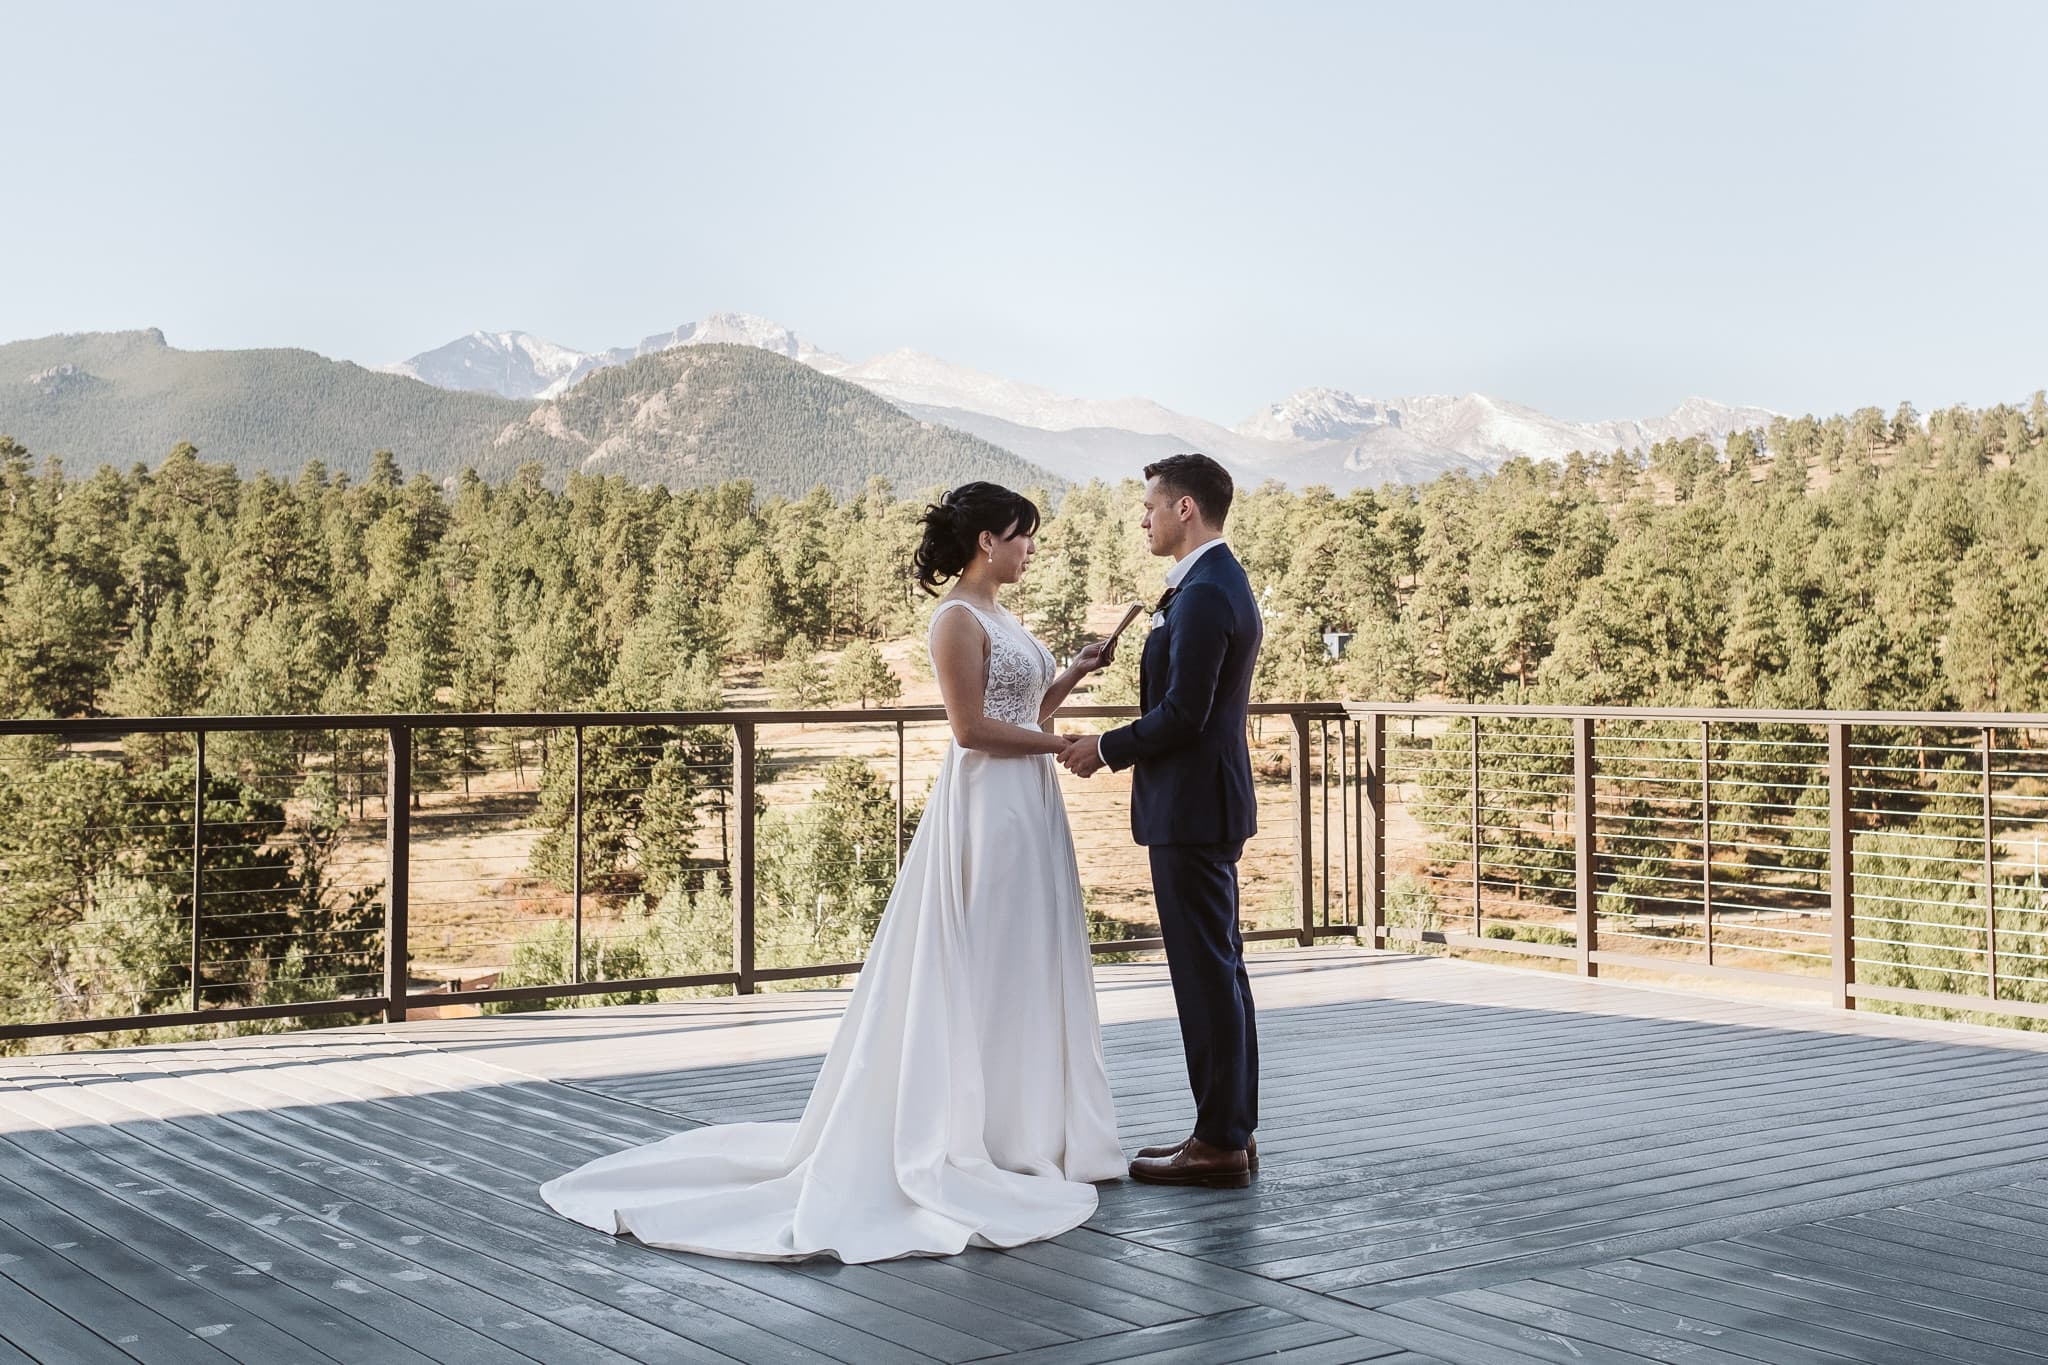 Skyview at Fall River elopement and wedding venue in Estes Park